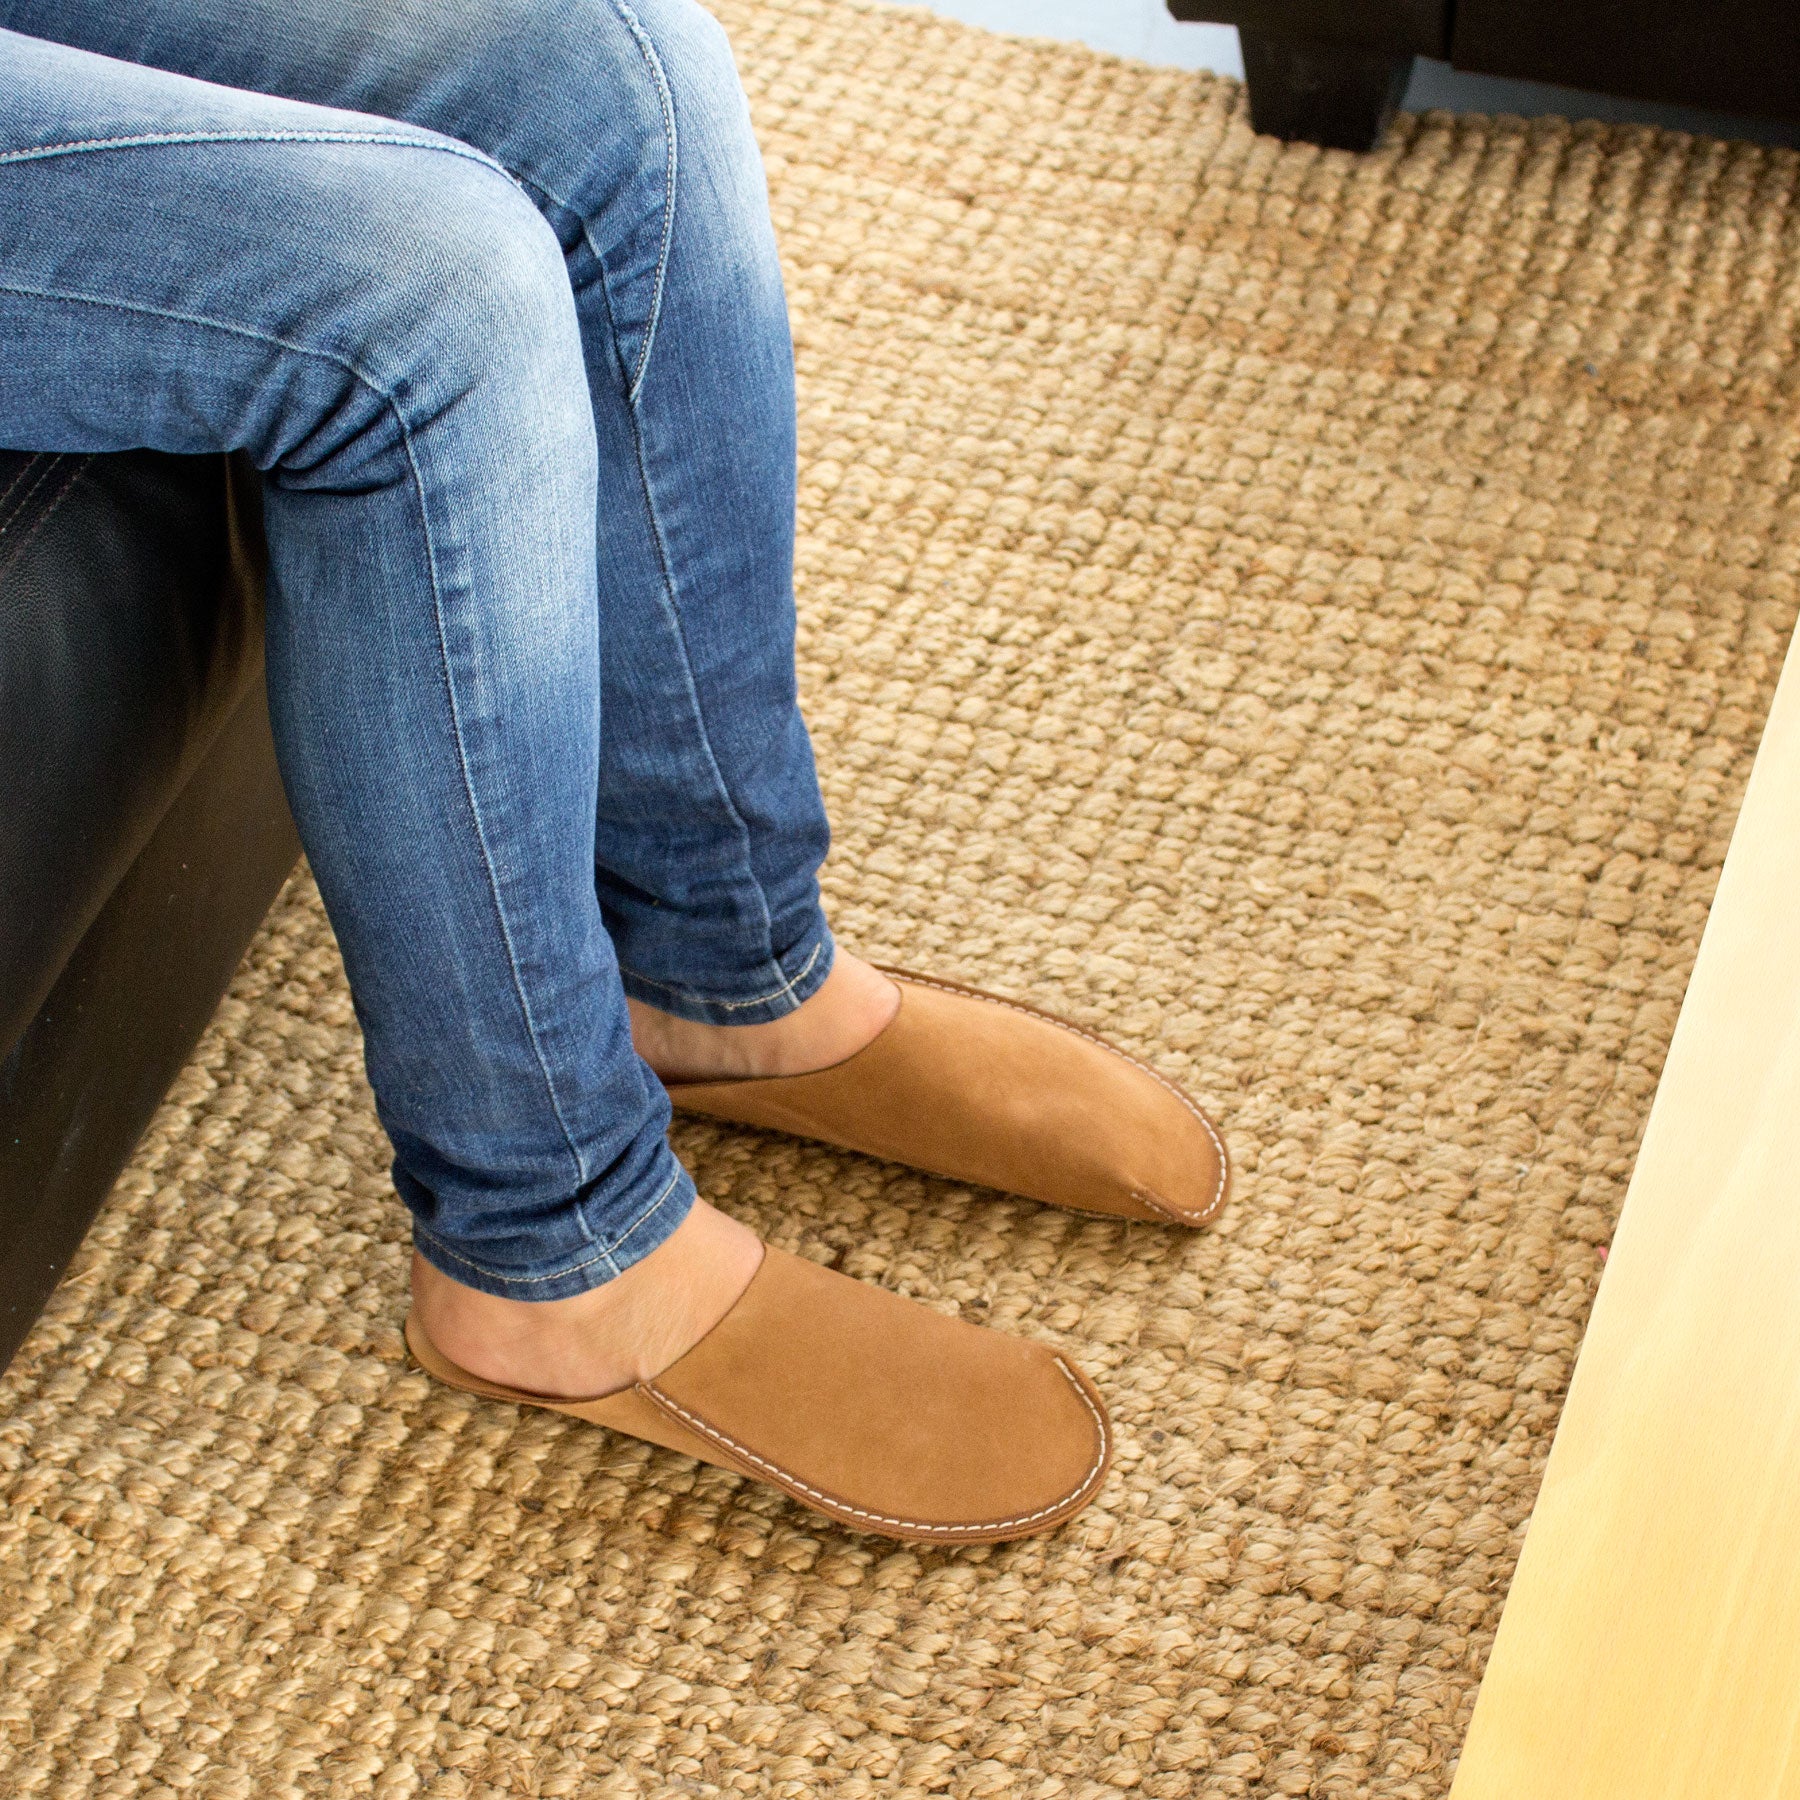 Tan CP Slippers Minimalist slippers shoes for man and woman at home